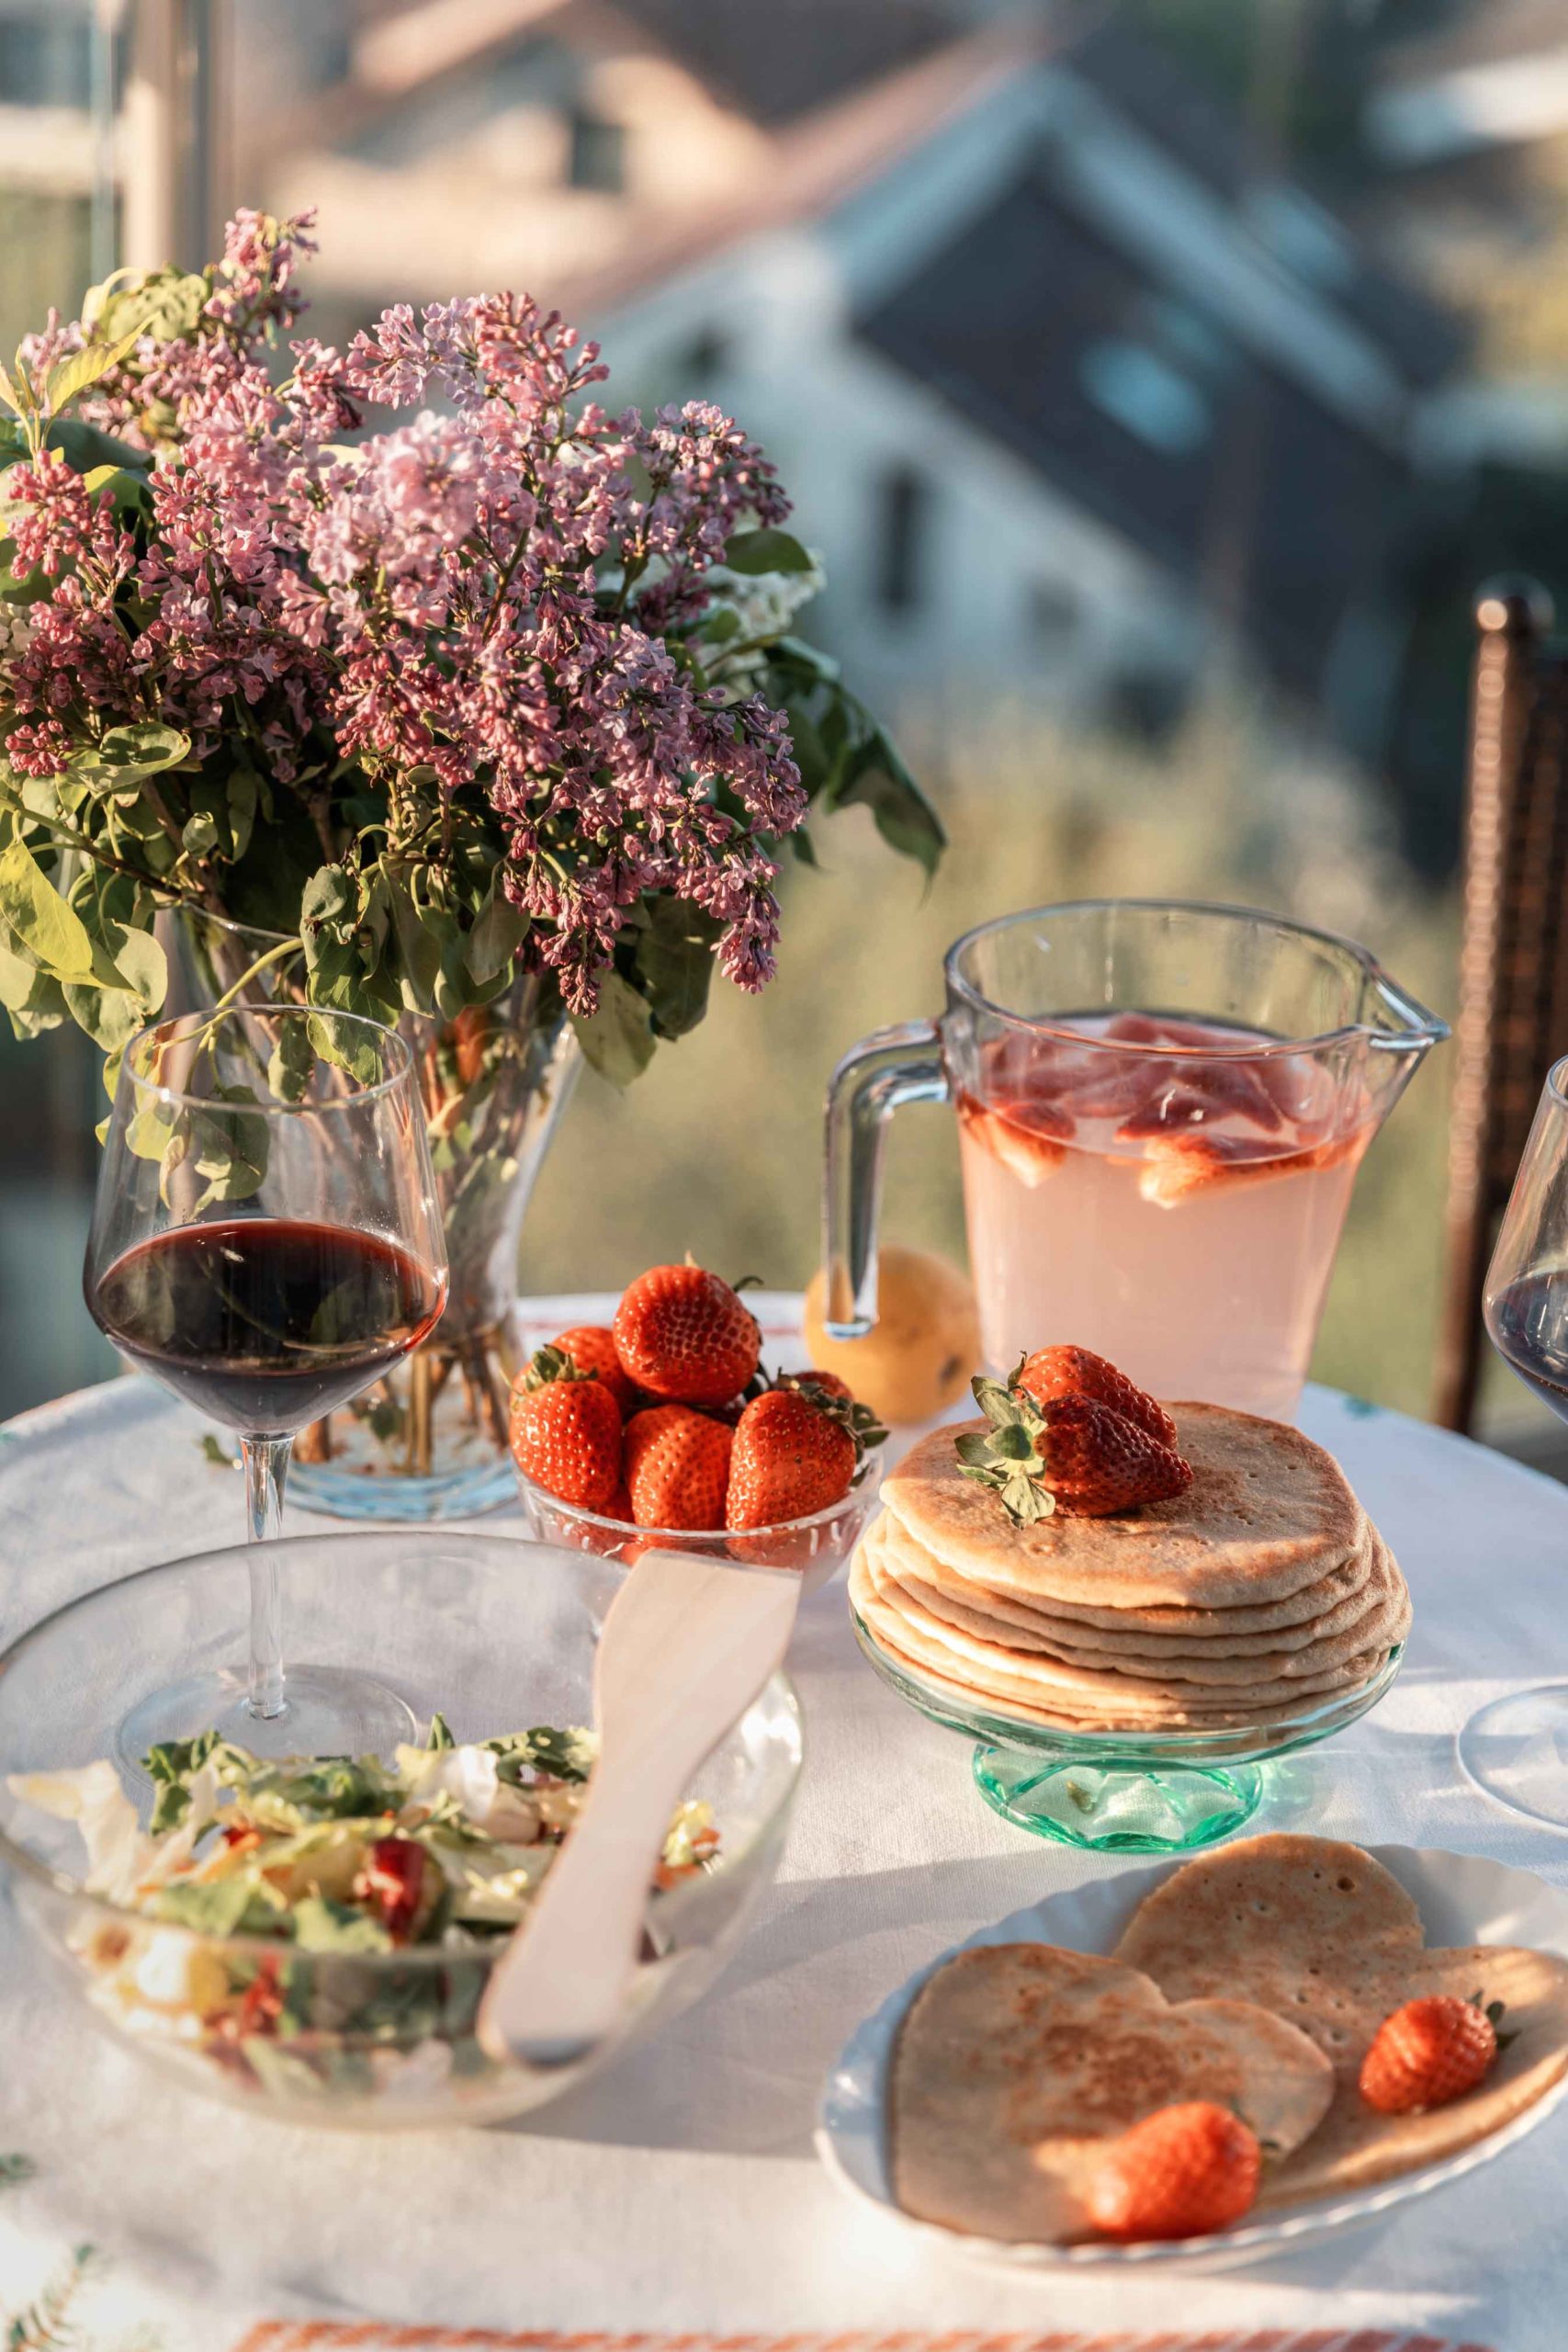 Dinner on the balcony: 3 easy recipes to try at home